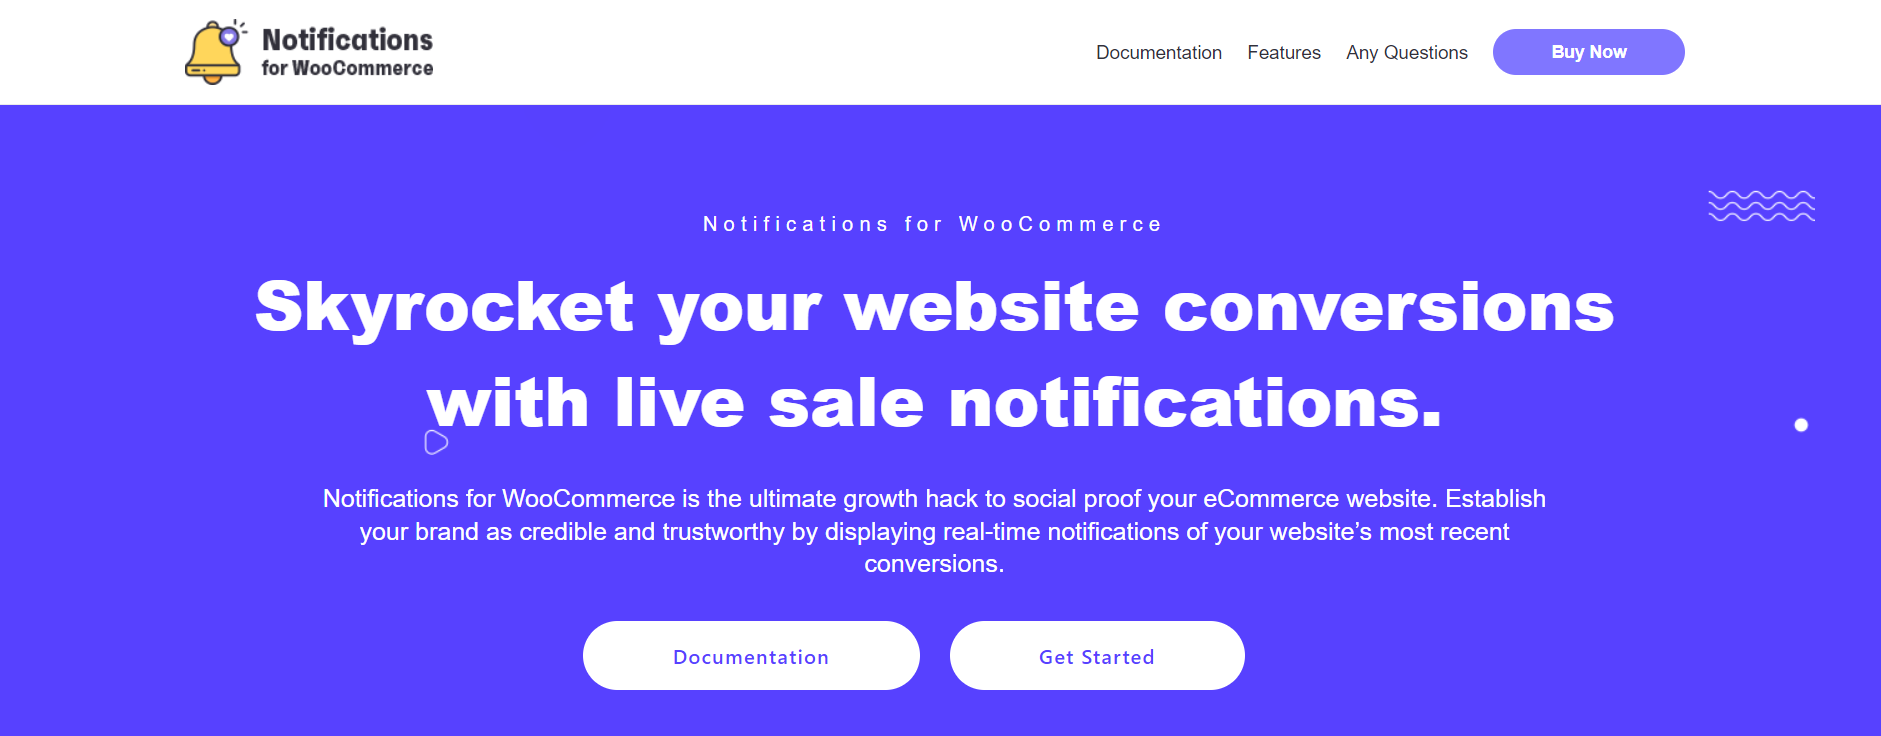 Notifications for WooCommerce